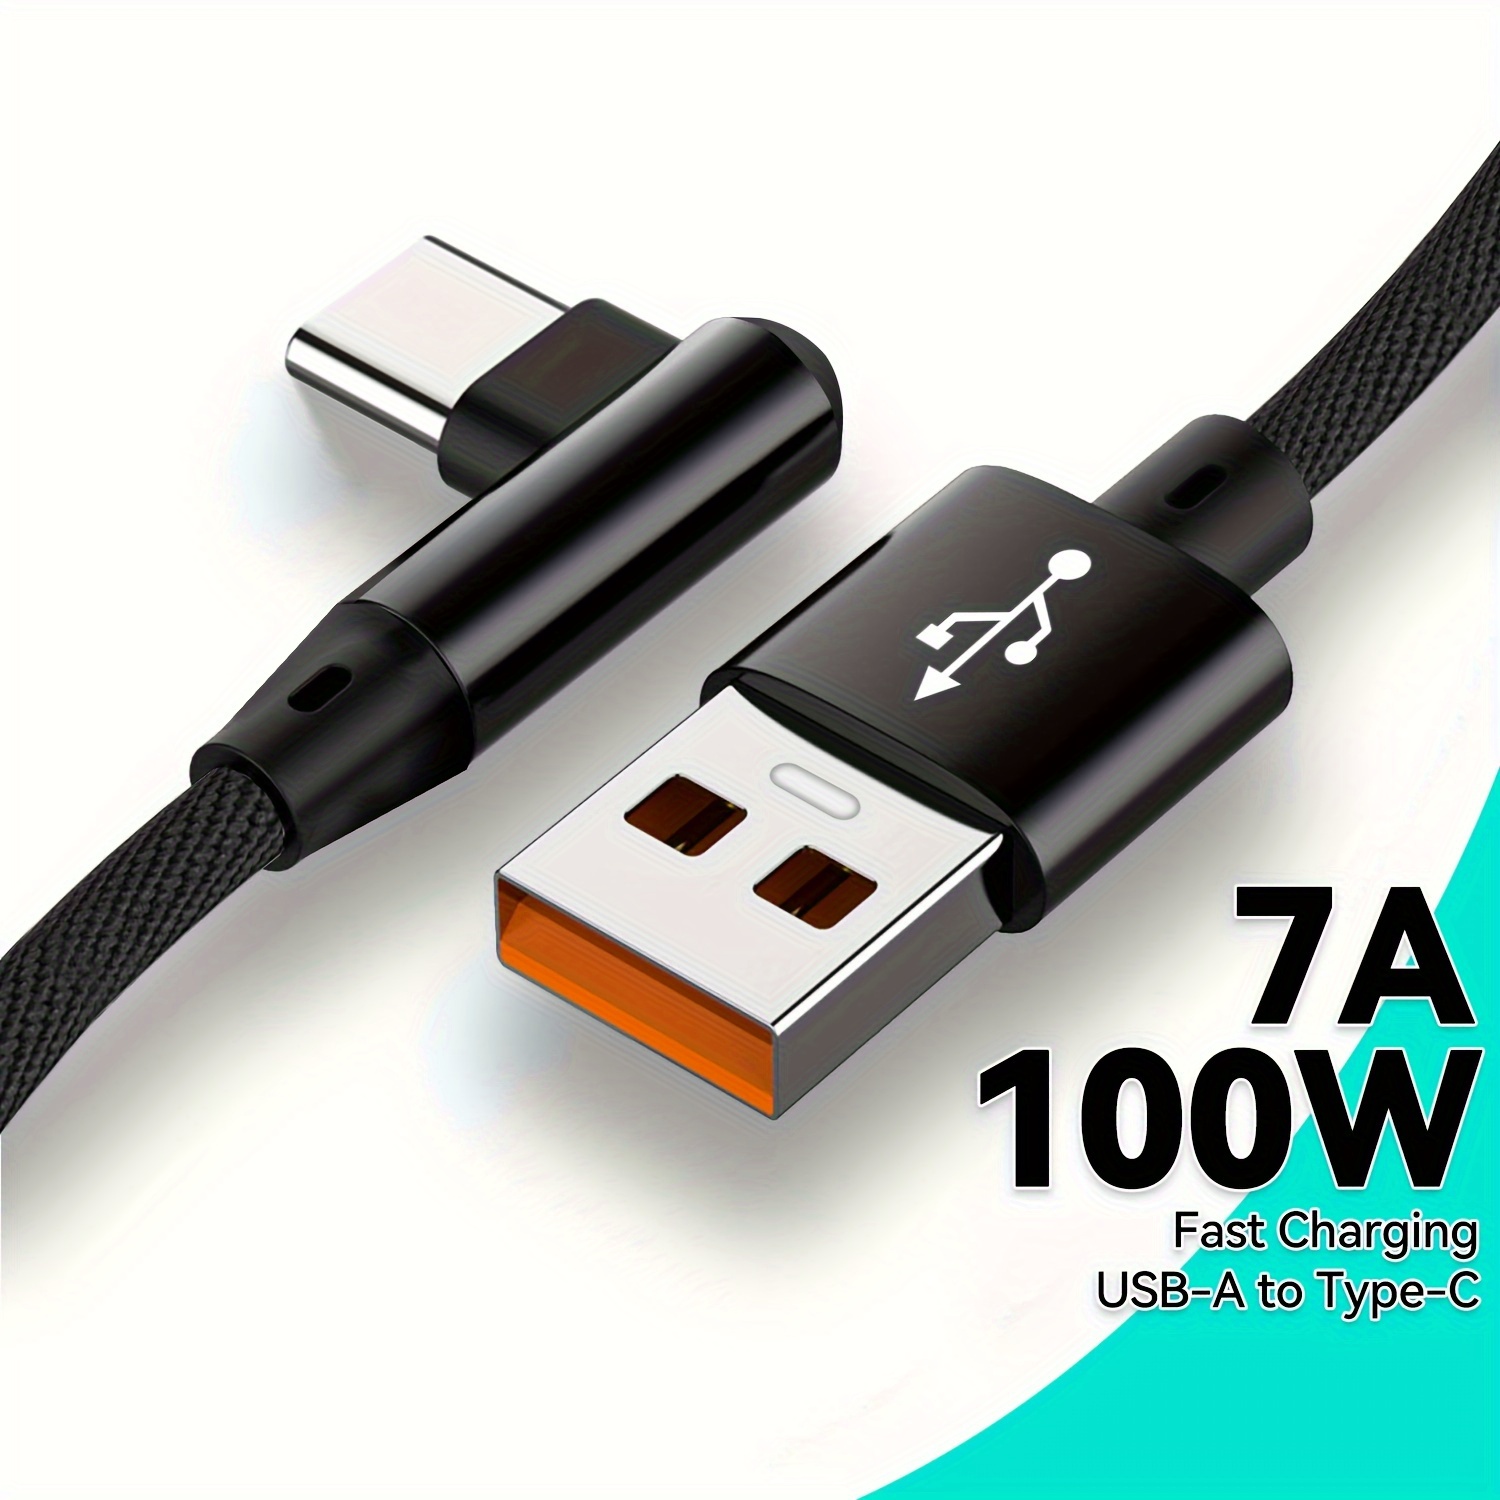 SooPii 100W Right Angle USB C to USB C Cable, 10FT Zinc Alloy Braided Type-C  Cable with LED Display for lPad Mini/Air/Pro, MacBook Pro, Samsung  S23/S22/S10, Pixel, LG 